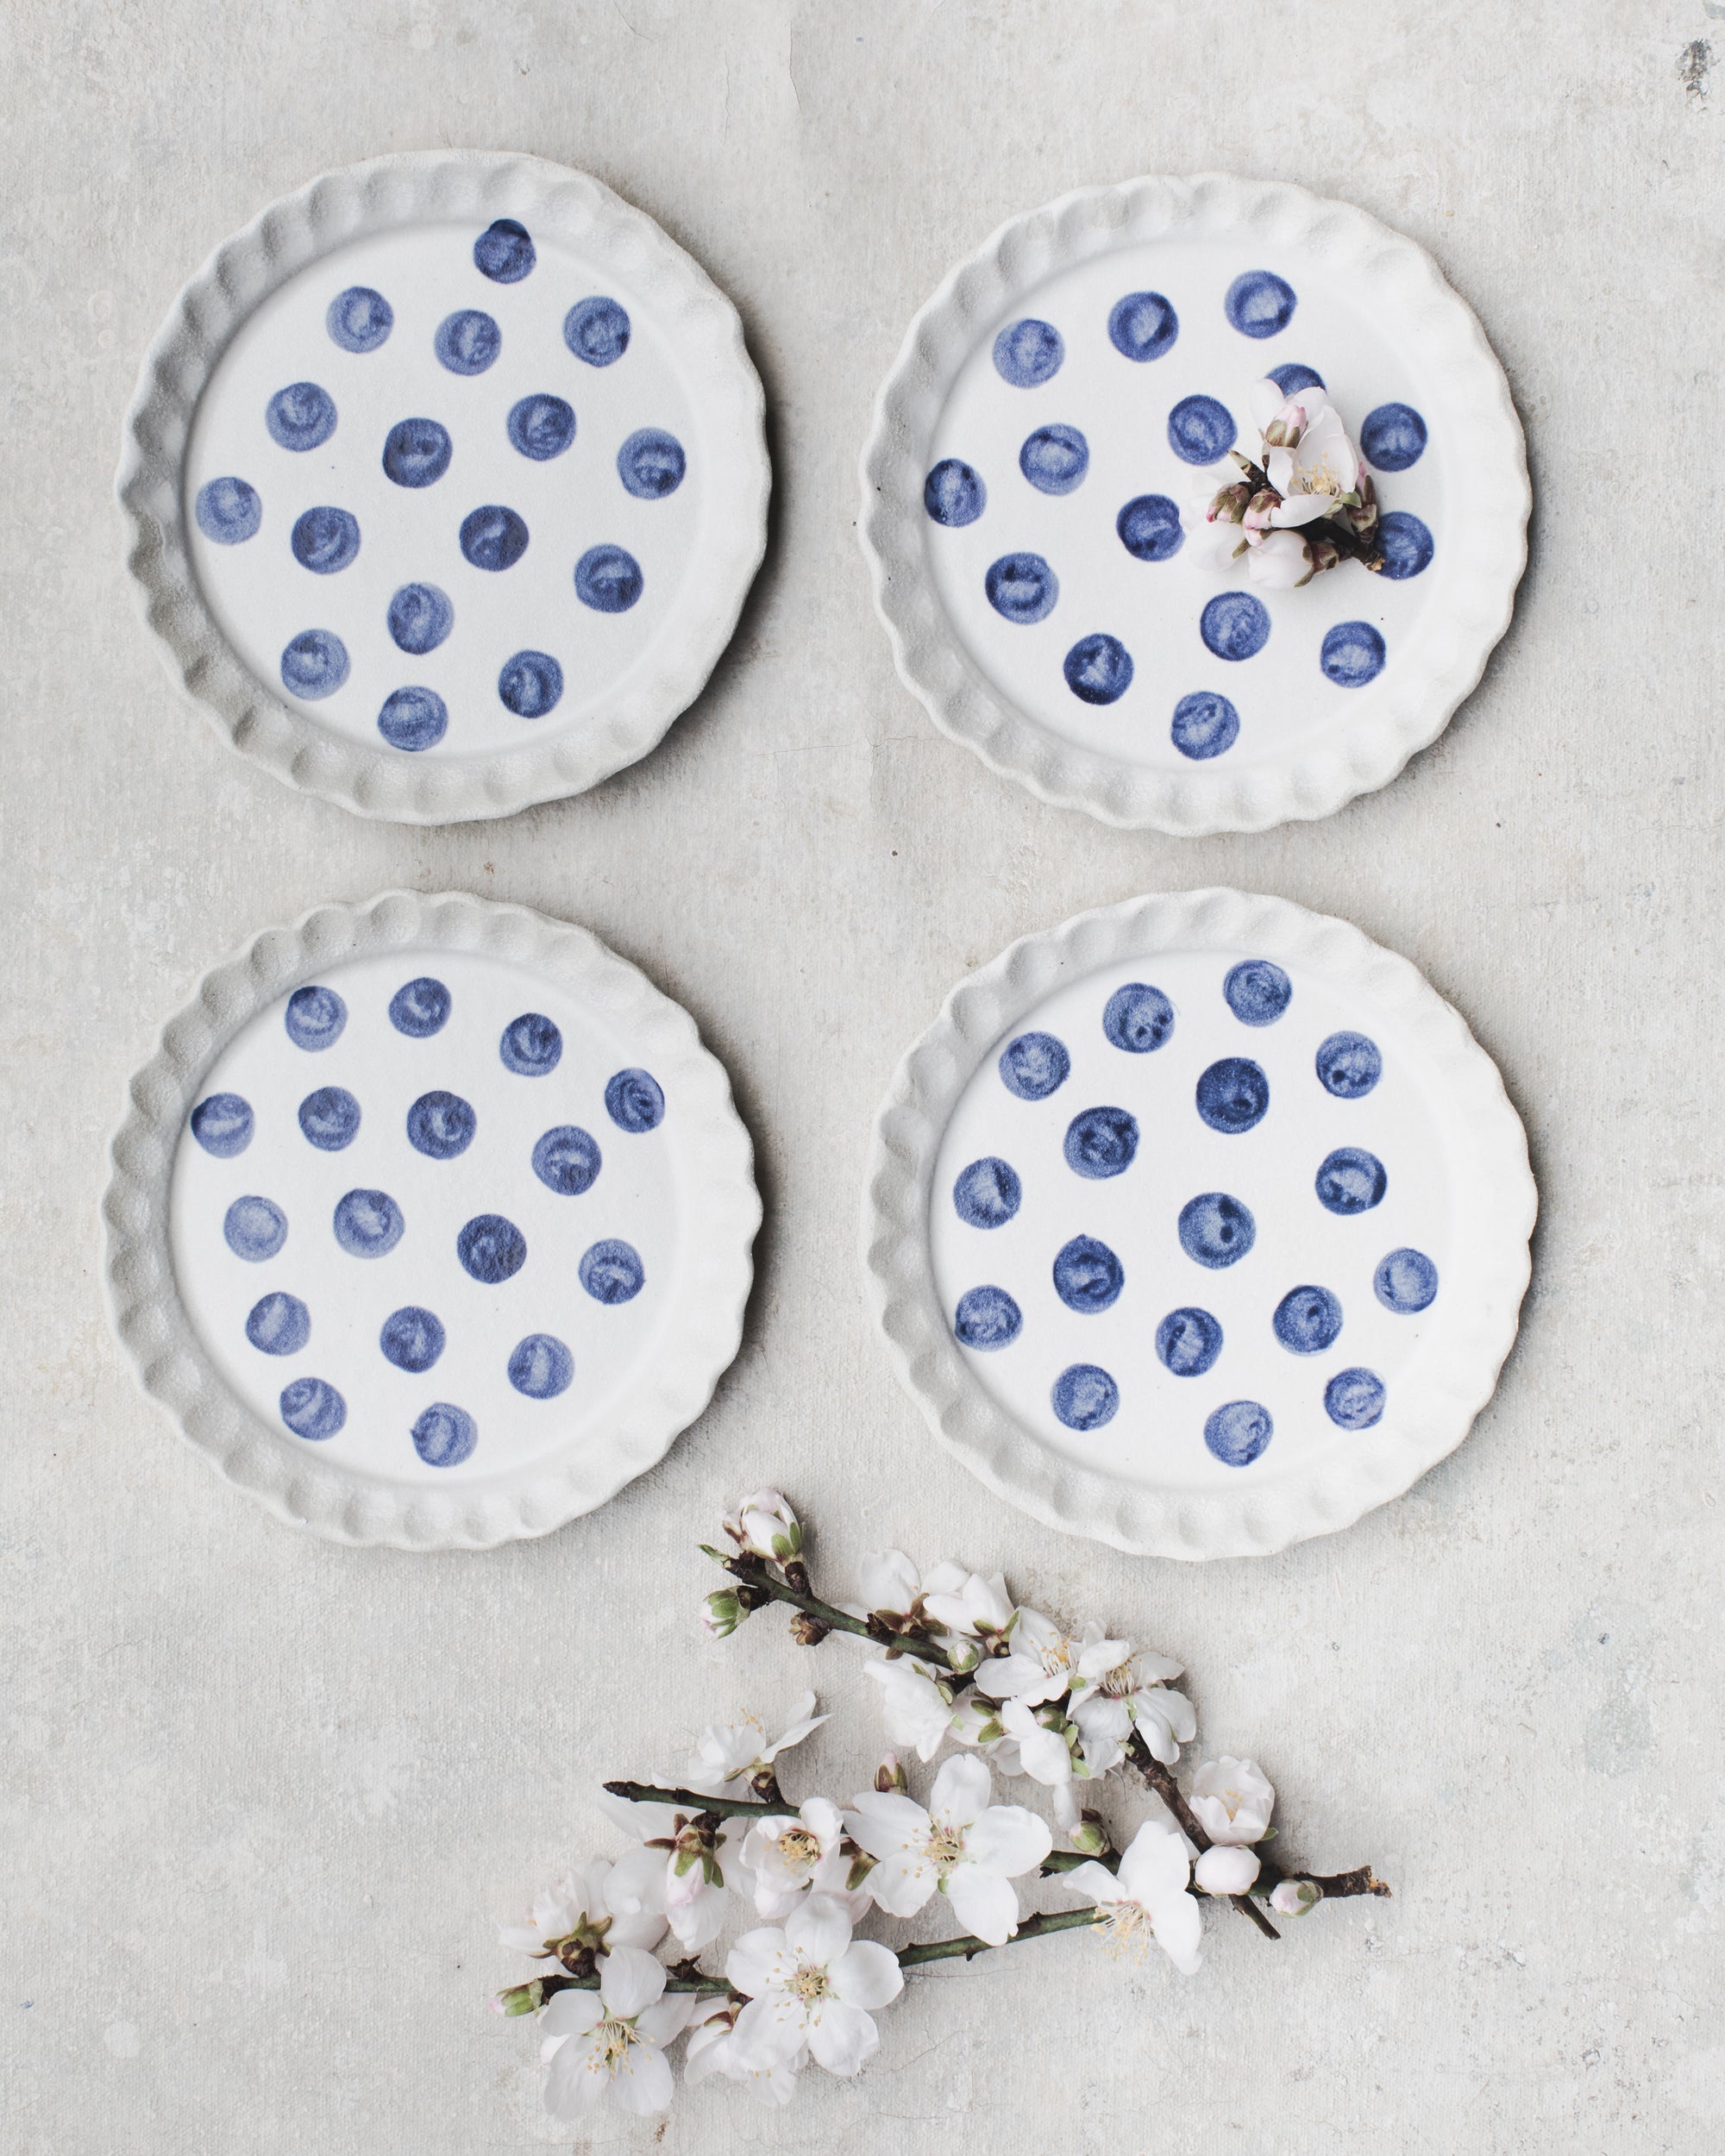 Handmade ceramic plates 14cm with scalloped rims and navy blue polka dots by Clay Beehive